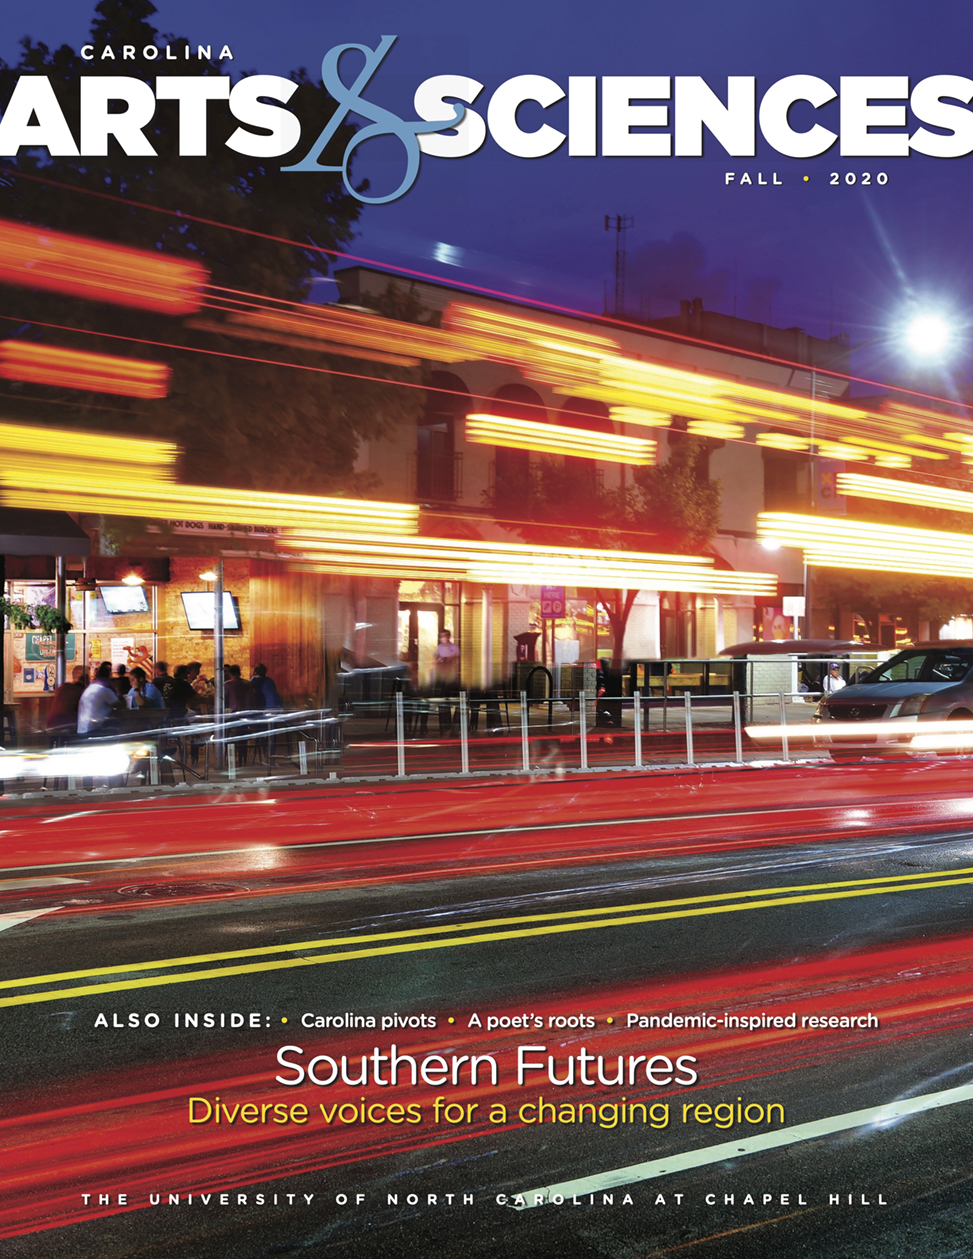 Cover image of Carolina Arts & Sciences magazine, fall 2020 issue, shows a downtown streetscape of Chapel Hill at night, with blurred headlights and street lights marking the landscape.